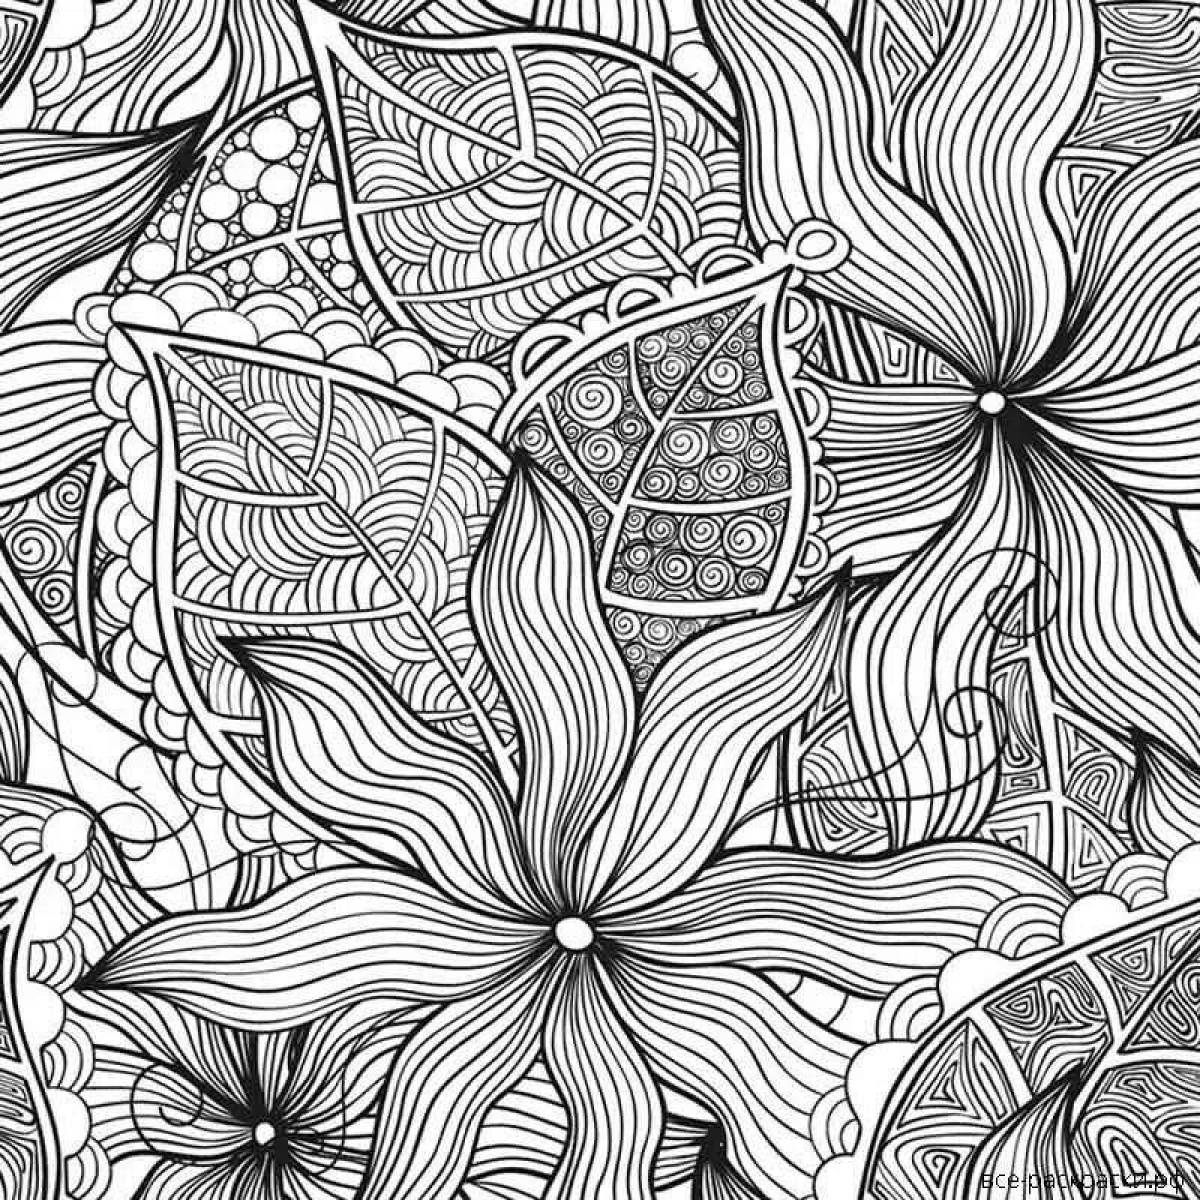 Exciting coloring book, long page